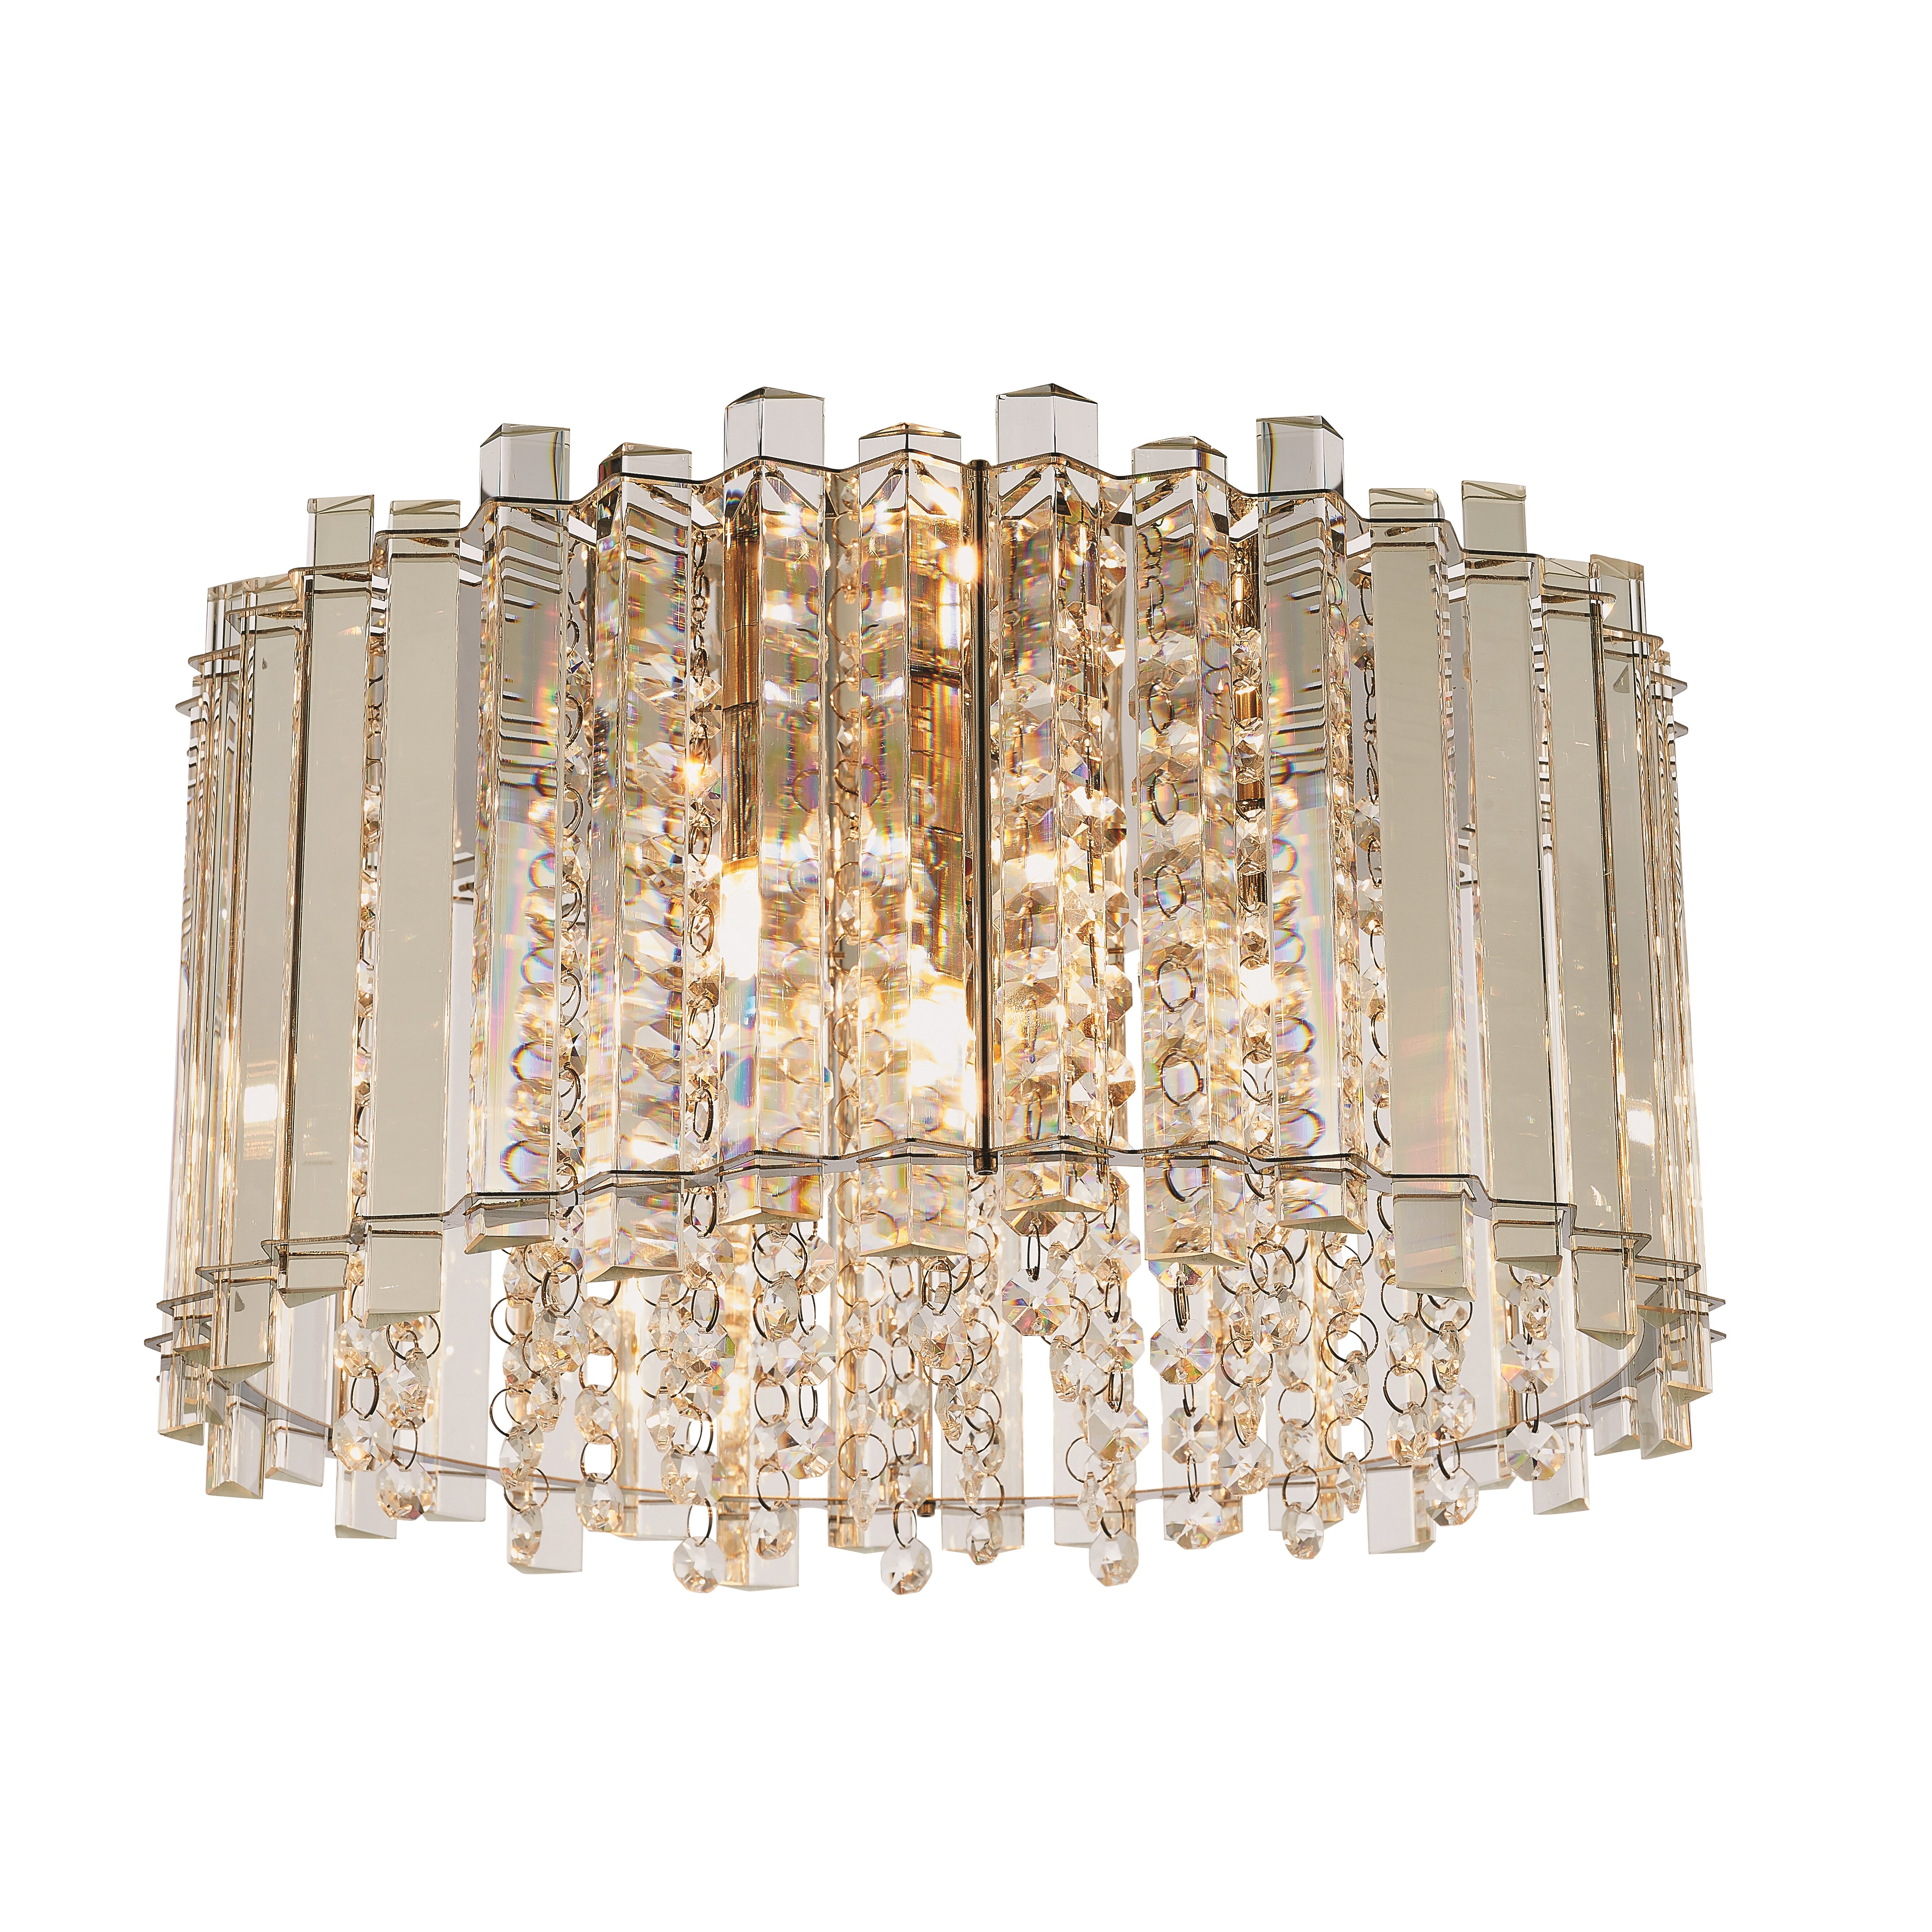 4 Light Flush Ceiling Light with Crystal Droplets